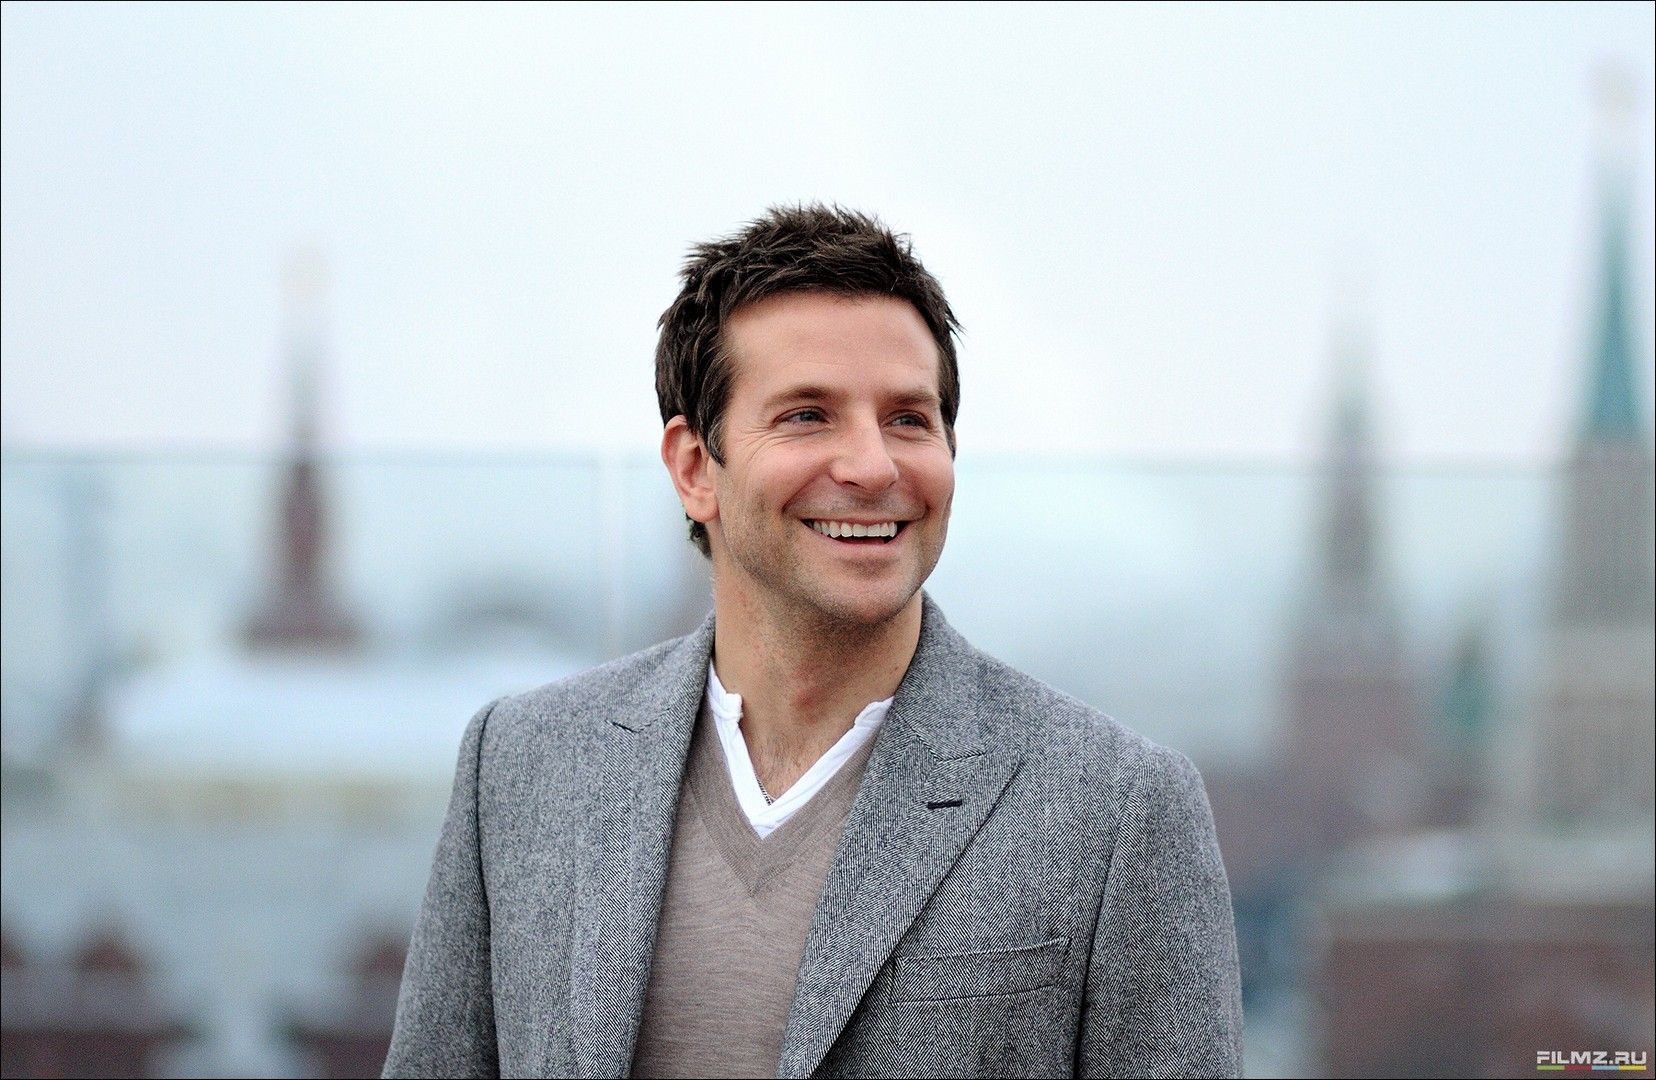 bradley cooper wallpaper,white collar worker,suit,businessperson,smile,photography